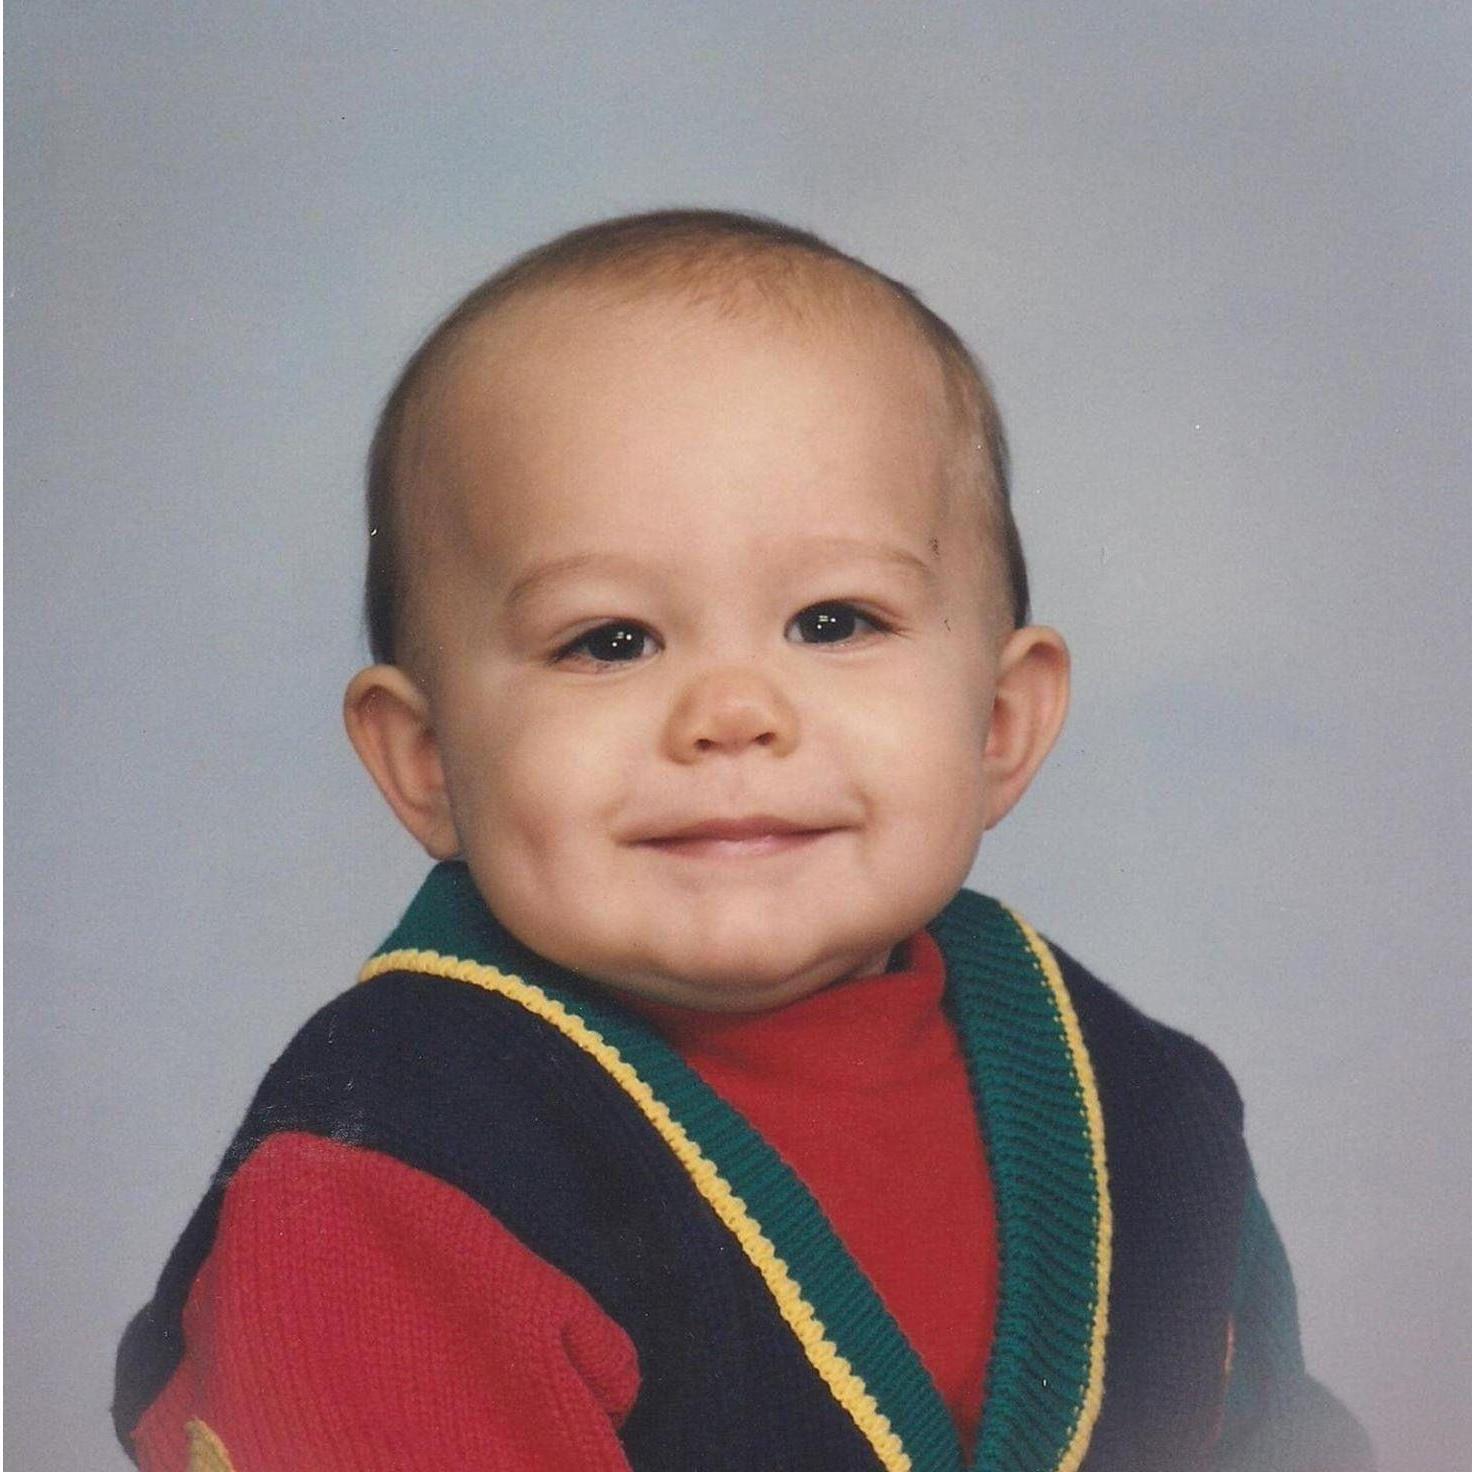 Wasn't he the cutest baby!